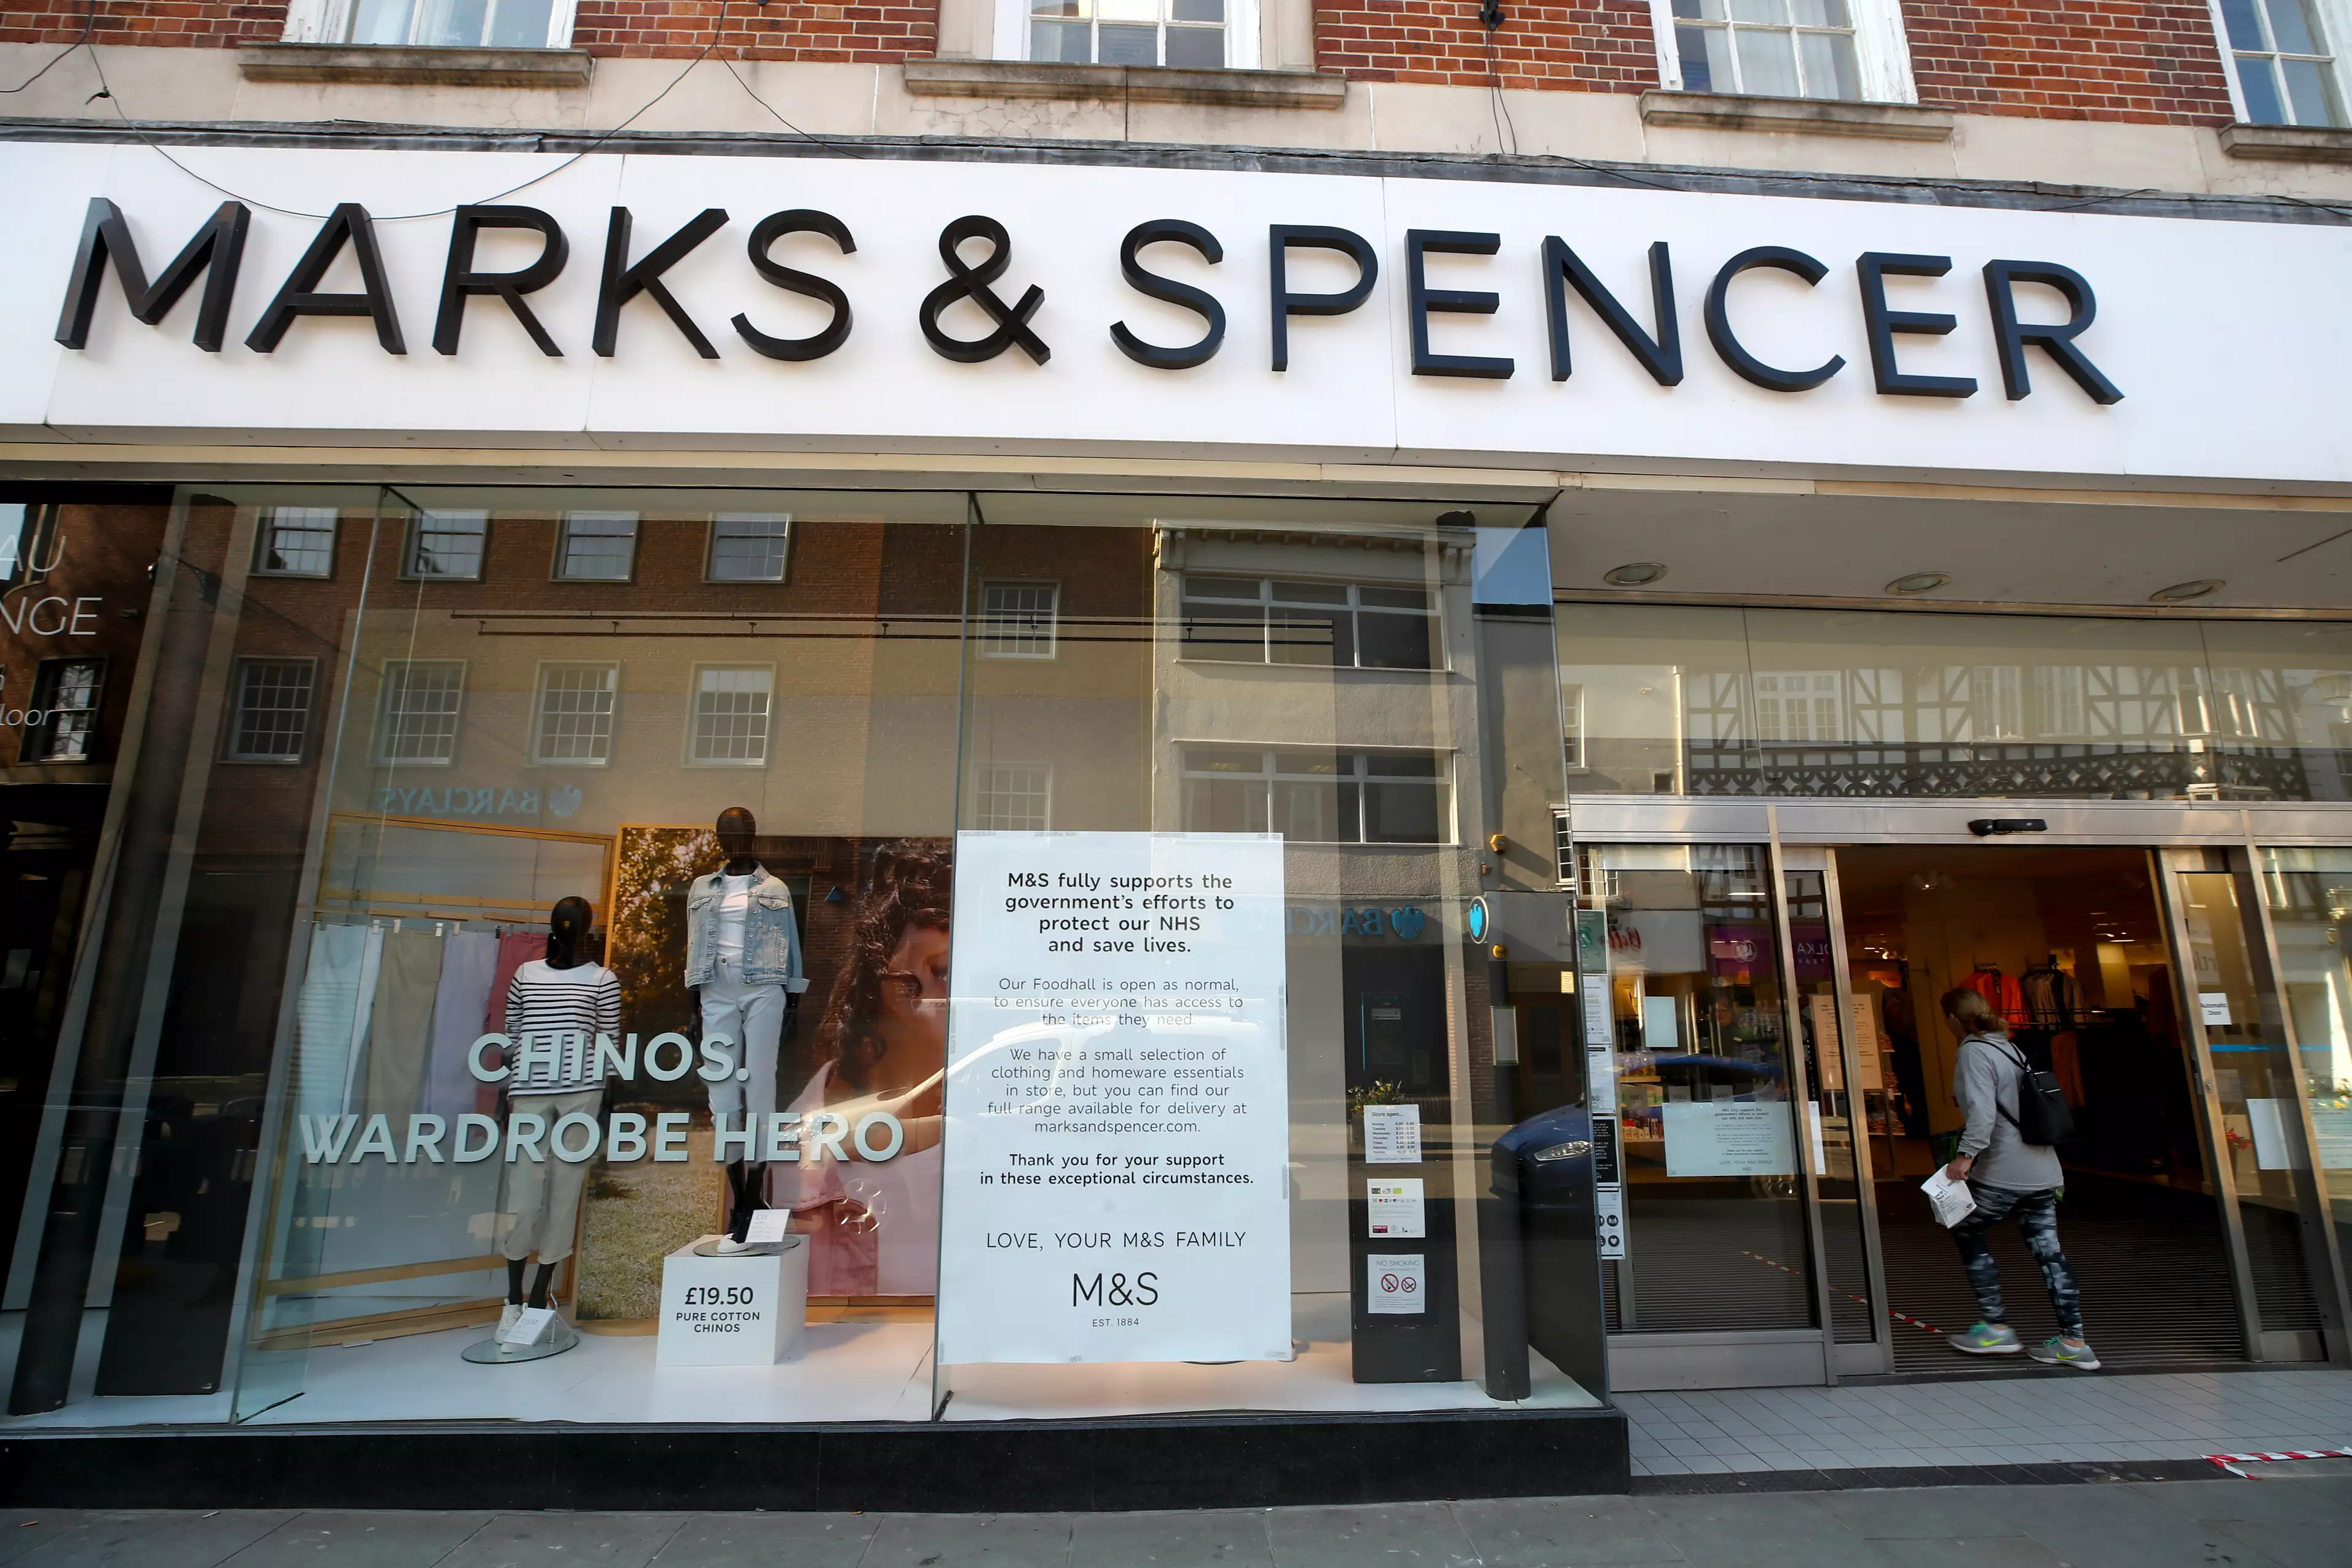 Marks & Spencer have hired several famous faces to act as voiceovers (